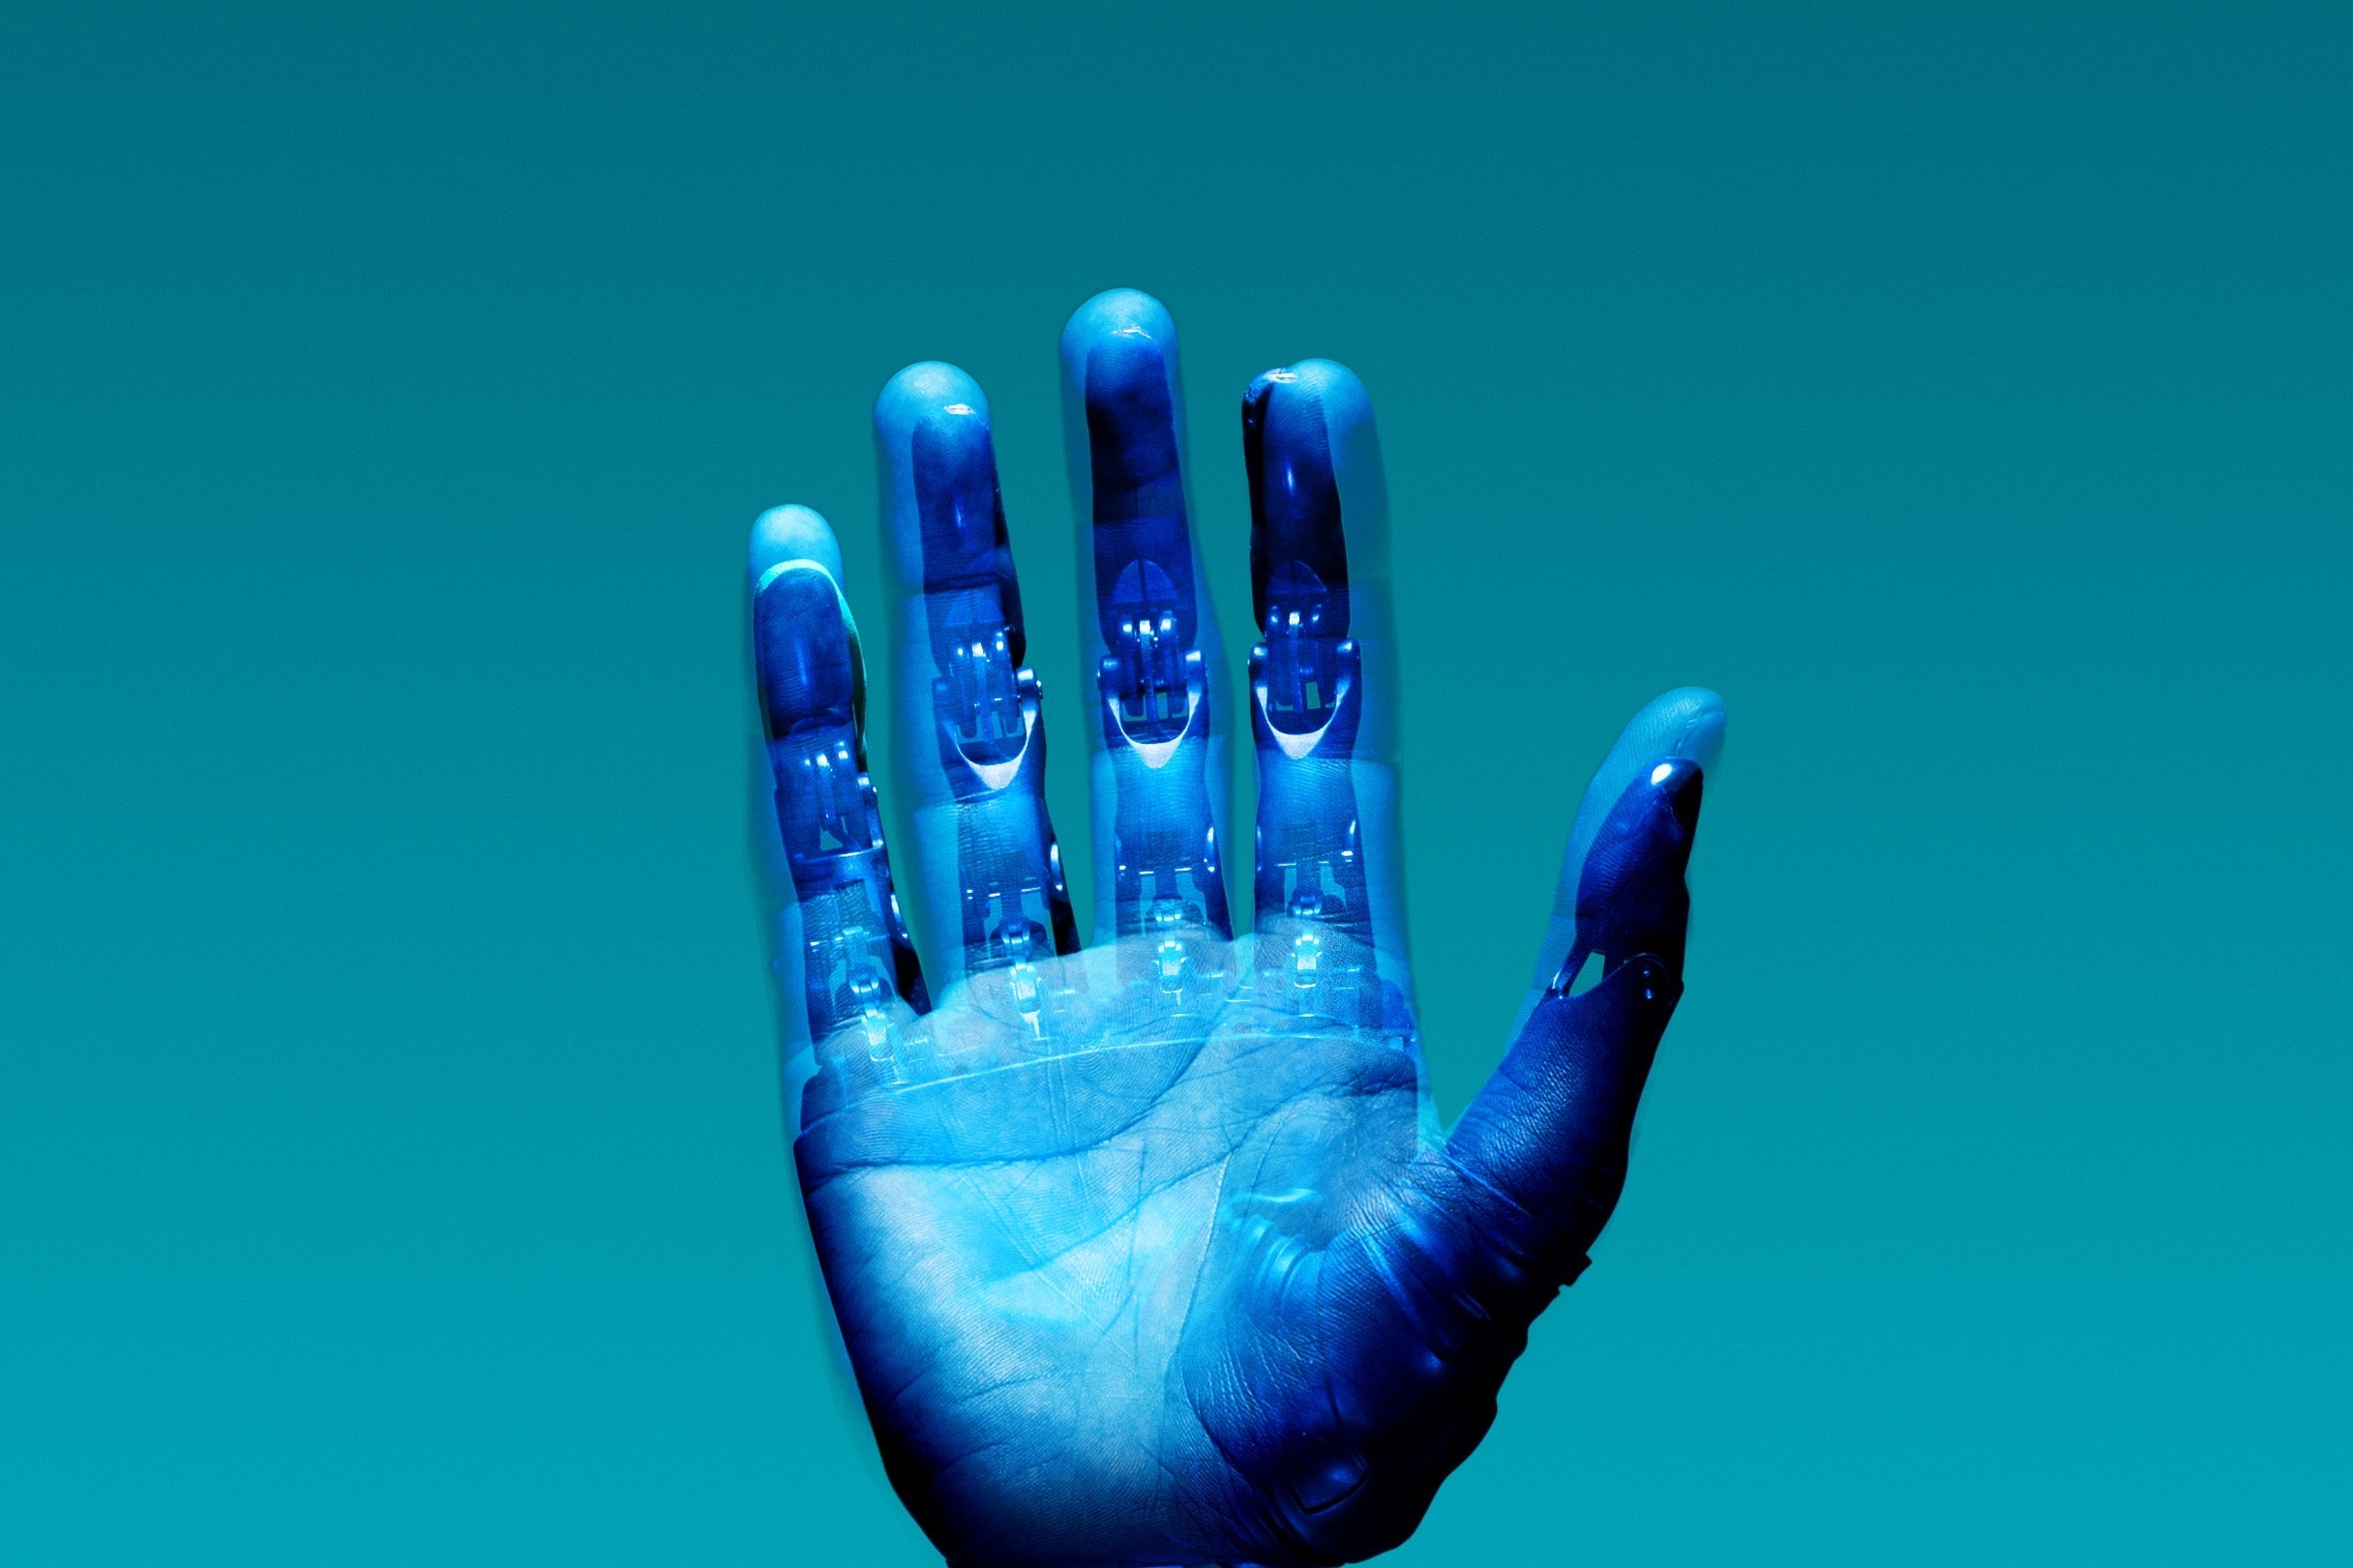 A hand bathed in blue light, superimposed with electronics.